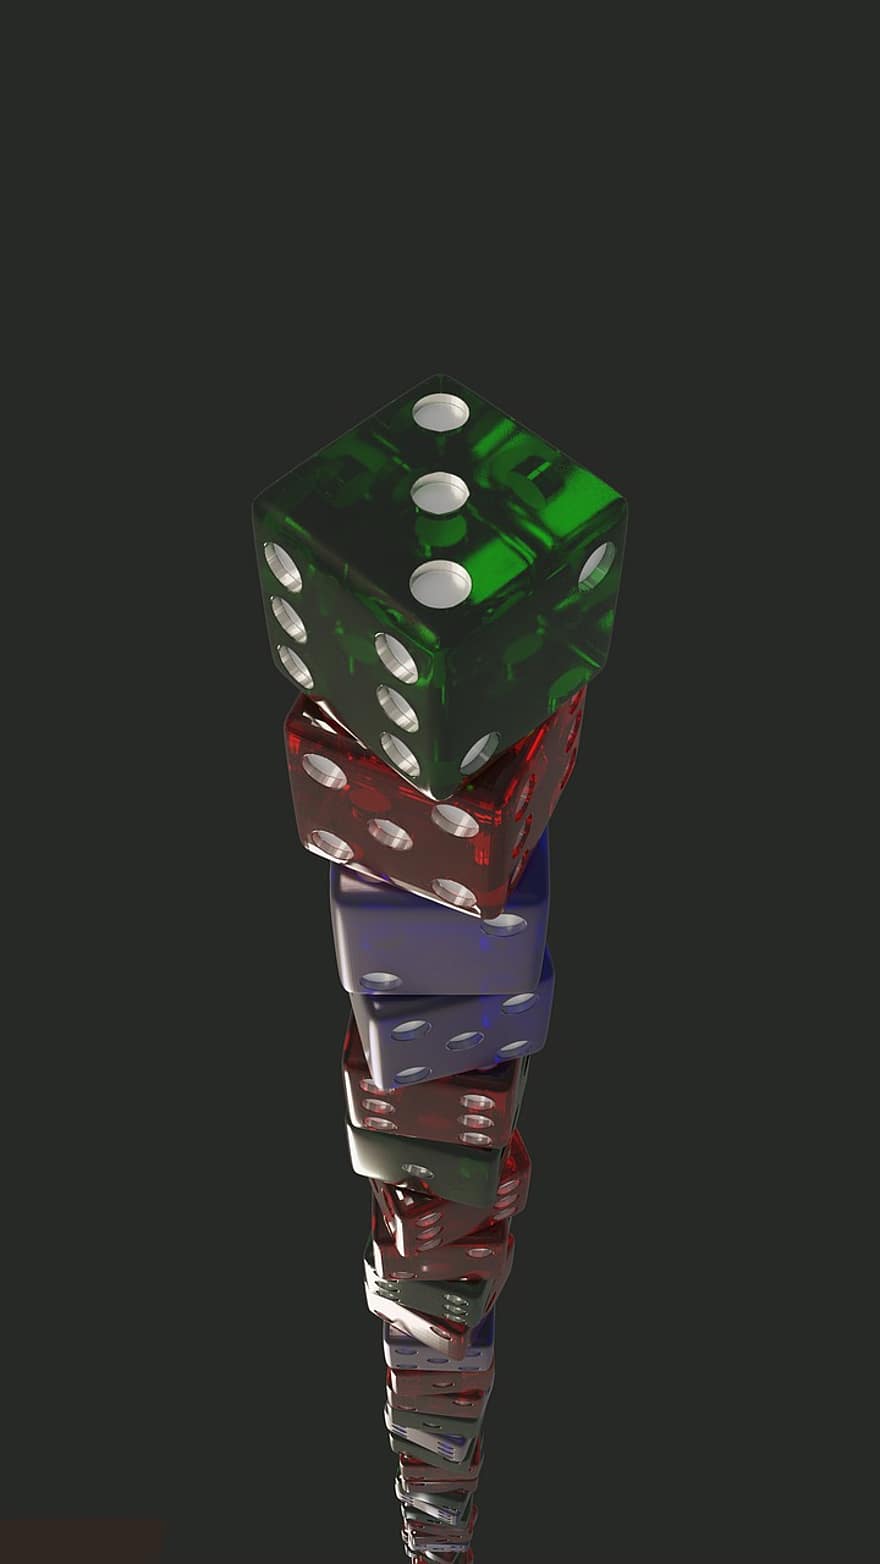 Dice, Tower, Gambling, Blocks, Geometry, Design, Screensaver, Abstract, Stacked, On Each Other, Multicoloured